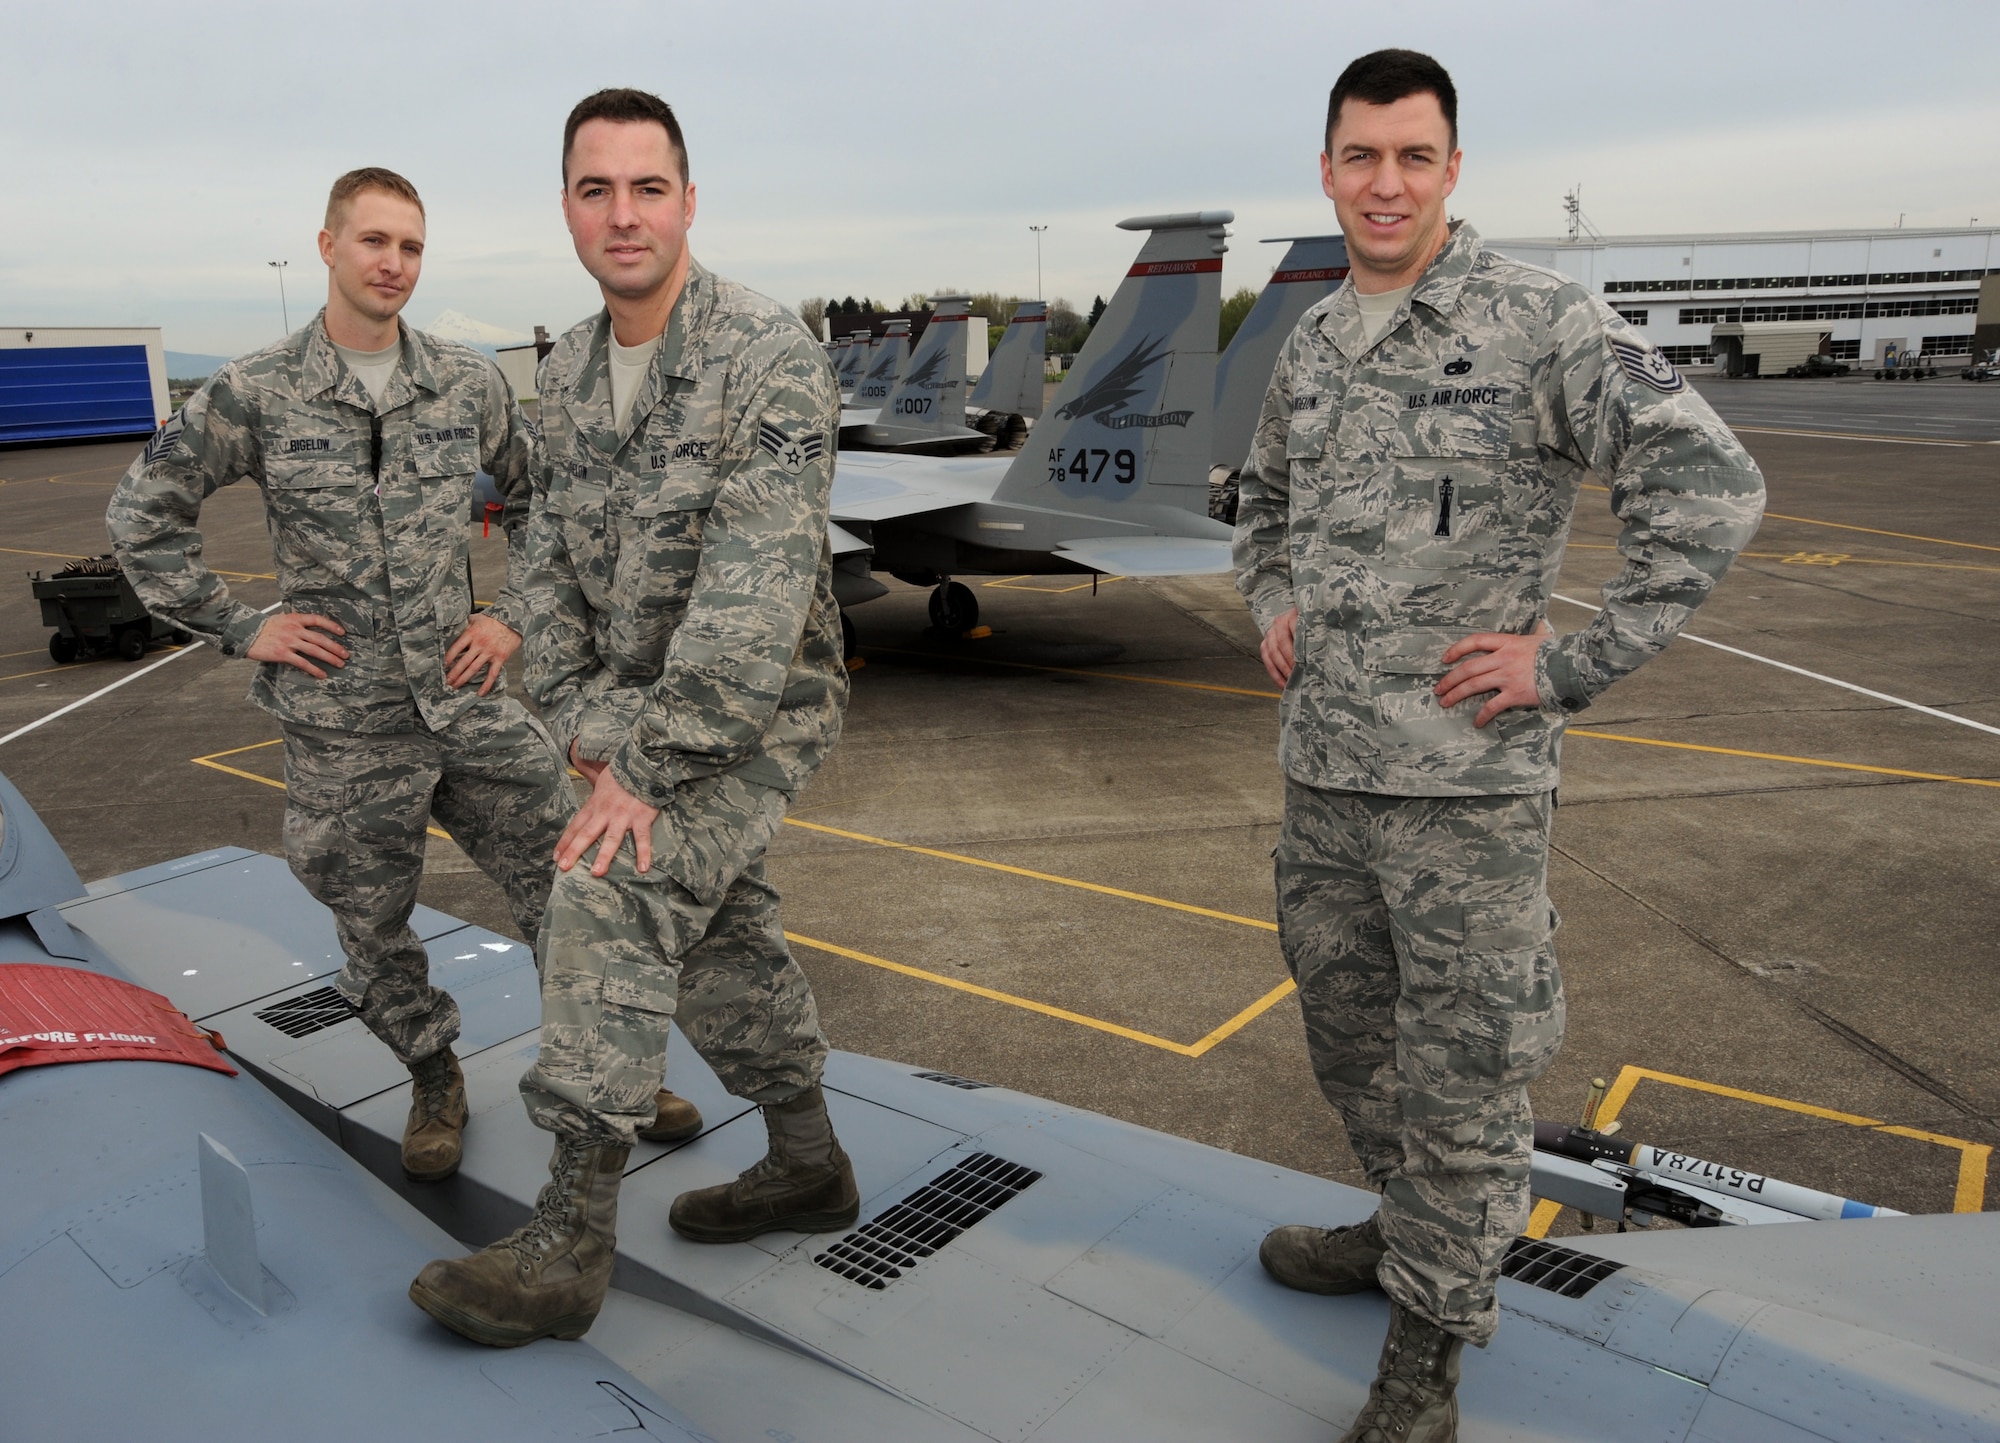 The three Bigelow bothers (left to right), Master Sgt. Ricky Bigelow, Senior Airman Sean Bigelow and Tech. Sgt. Jordan Bigelow stand together on an F-15 Eagle at the Portland Air National Guard Base, Portland, Ore., April 3, 2013.  All three brothers are members of the 142nd Fighter Wing and perform various maintenance trades on the supersonic air-to-air fighter jet. (Air National Guard photo by Tech. Sgt. John Hughel, 142nd Fighter Wing Public Affairs Office)